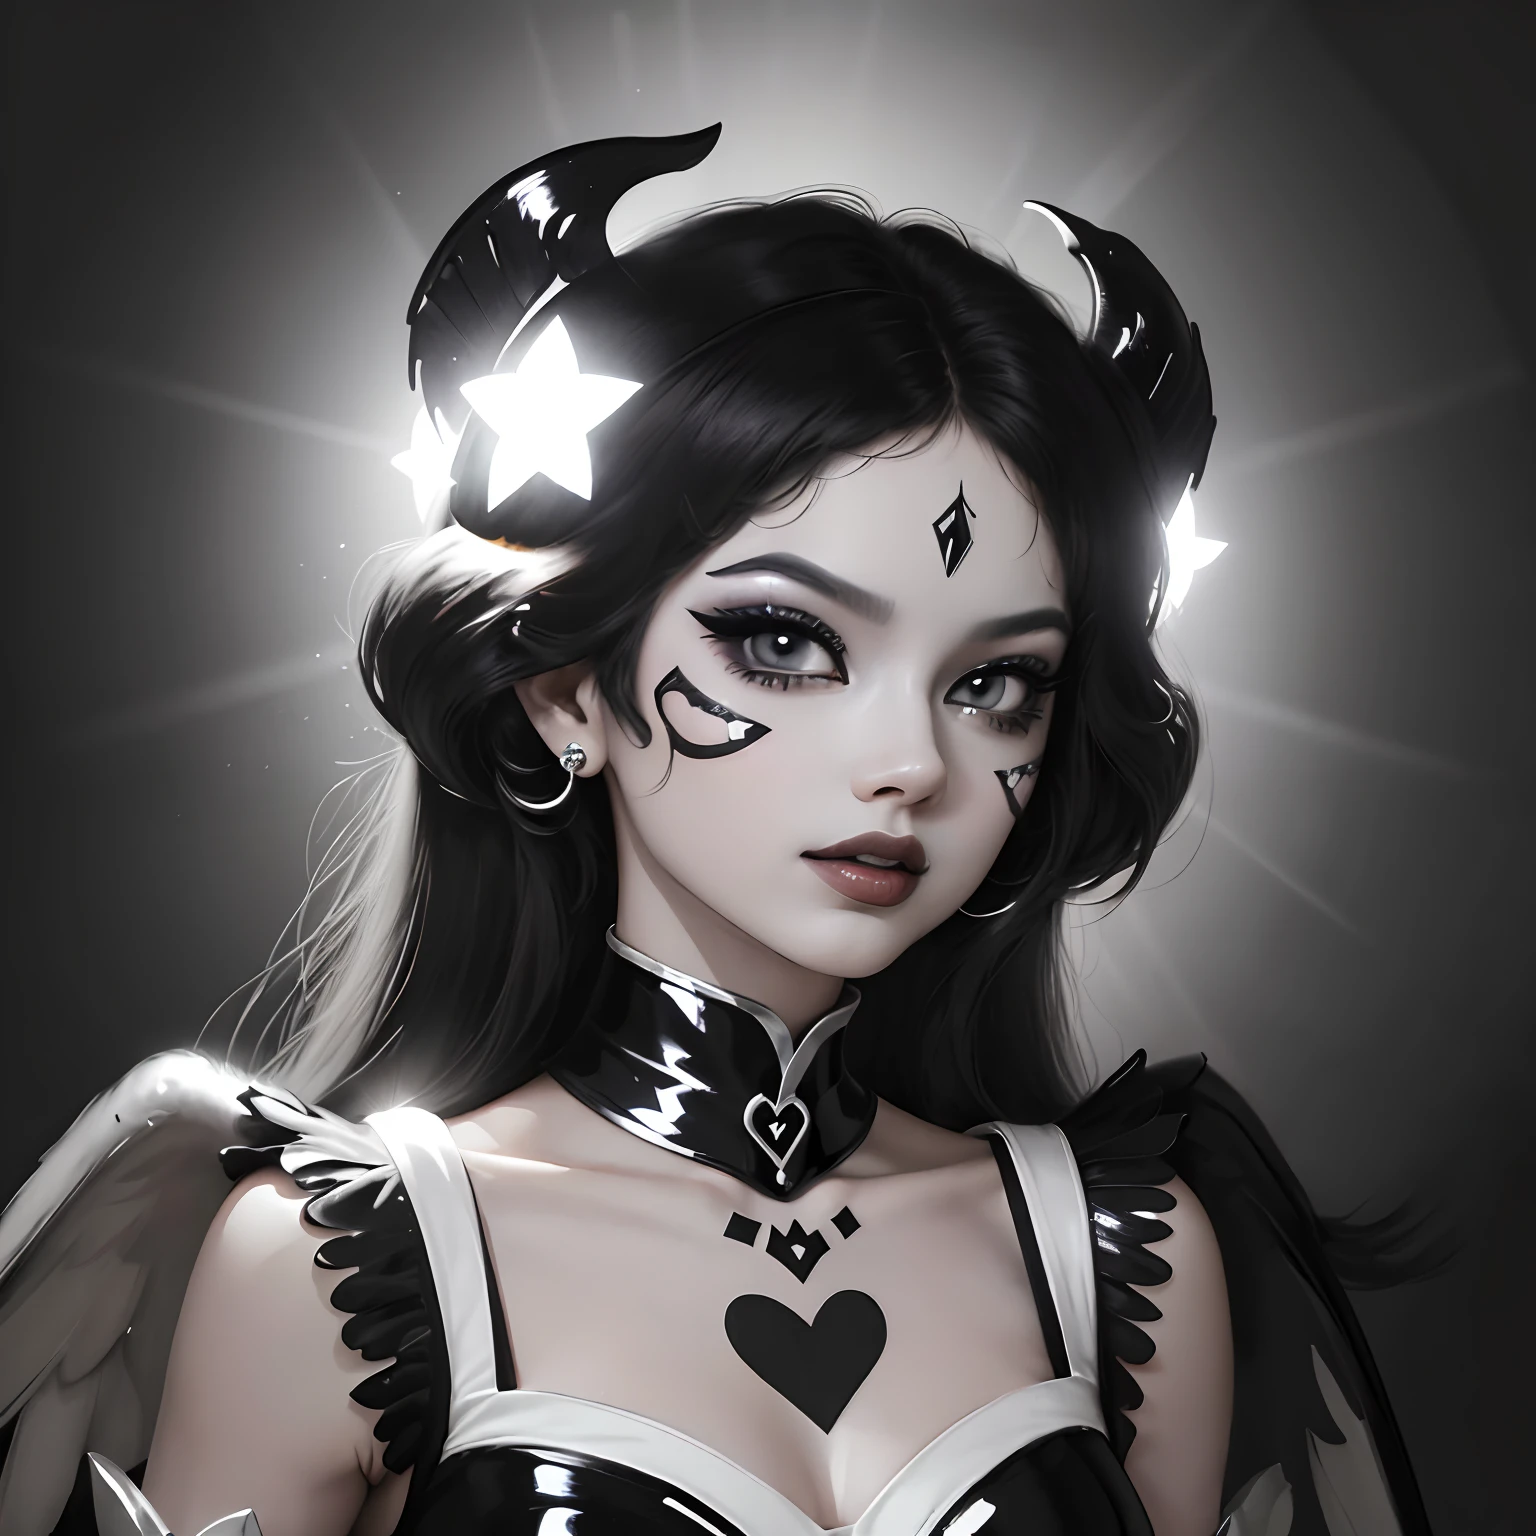 ((2.0 Ultra-Detailed)), (8K, Face Close-Up, ((2.0 Masterpiece)), Shiny Skin, Black And White Lighting), 1Girl, ((1.2 Cartoon Black White Angel Costume Look)), Fabric Background, Cartoon Face And Make-Up, Cartoon Accessories, Shiny Cartoon Eyes, Cartoon Dark Hairstyle, (Pinterest Trends, DeviantArt Trends), ((1.2 Inspired By Dragula TV-Show, Alice Angel Character))